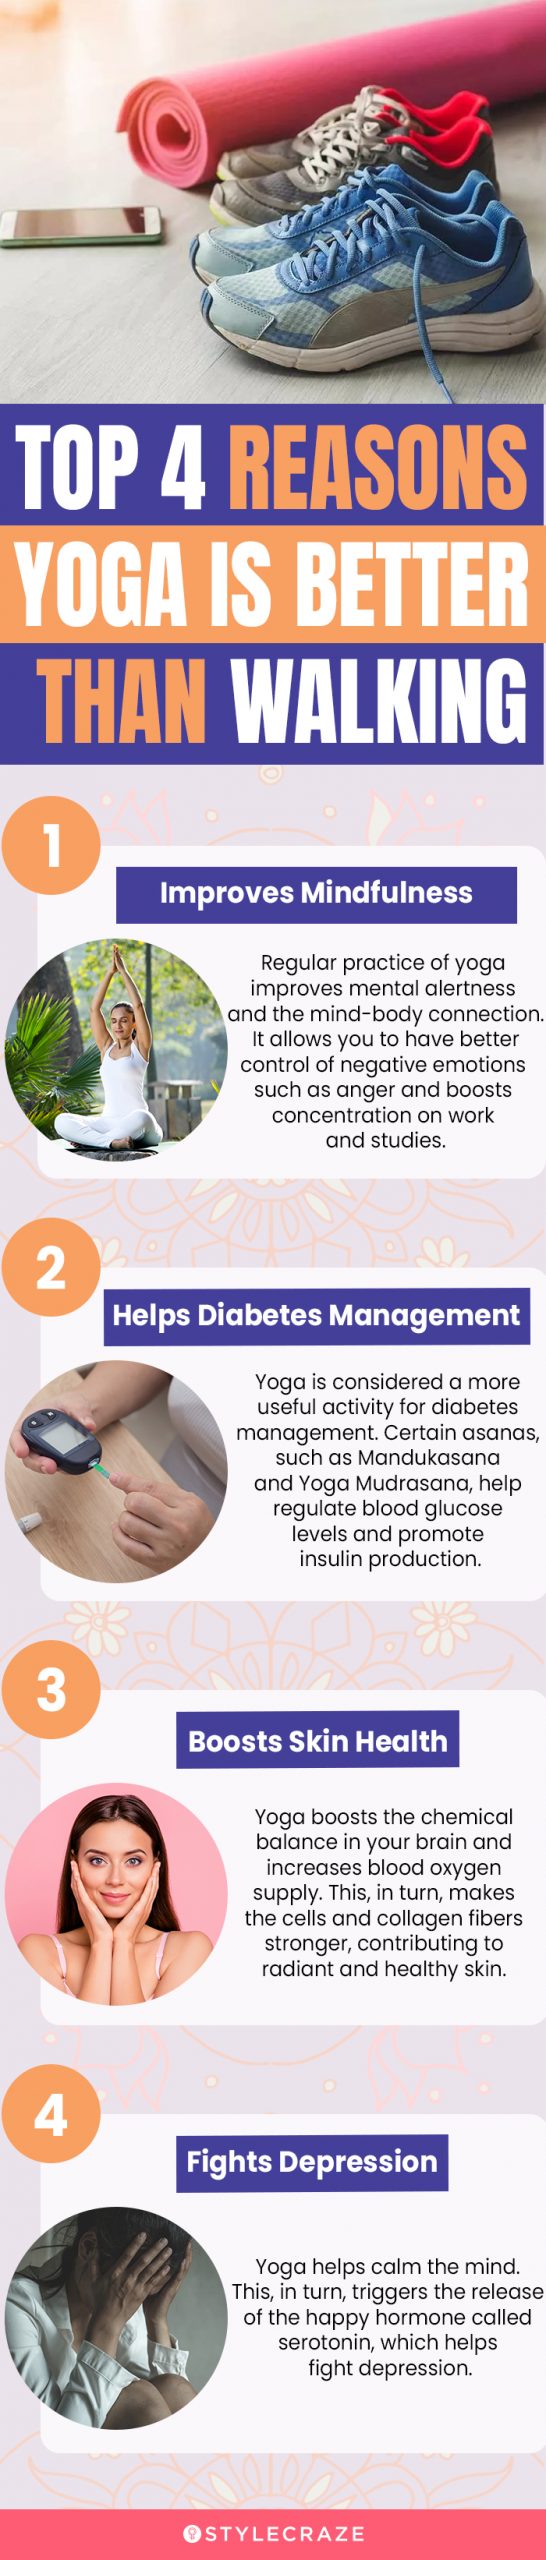 top 4 reasons yoga is better than walking (infographic)